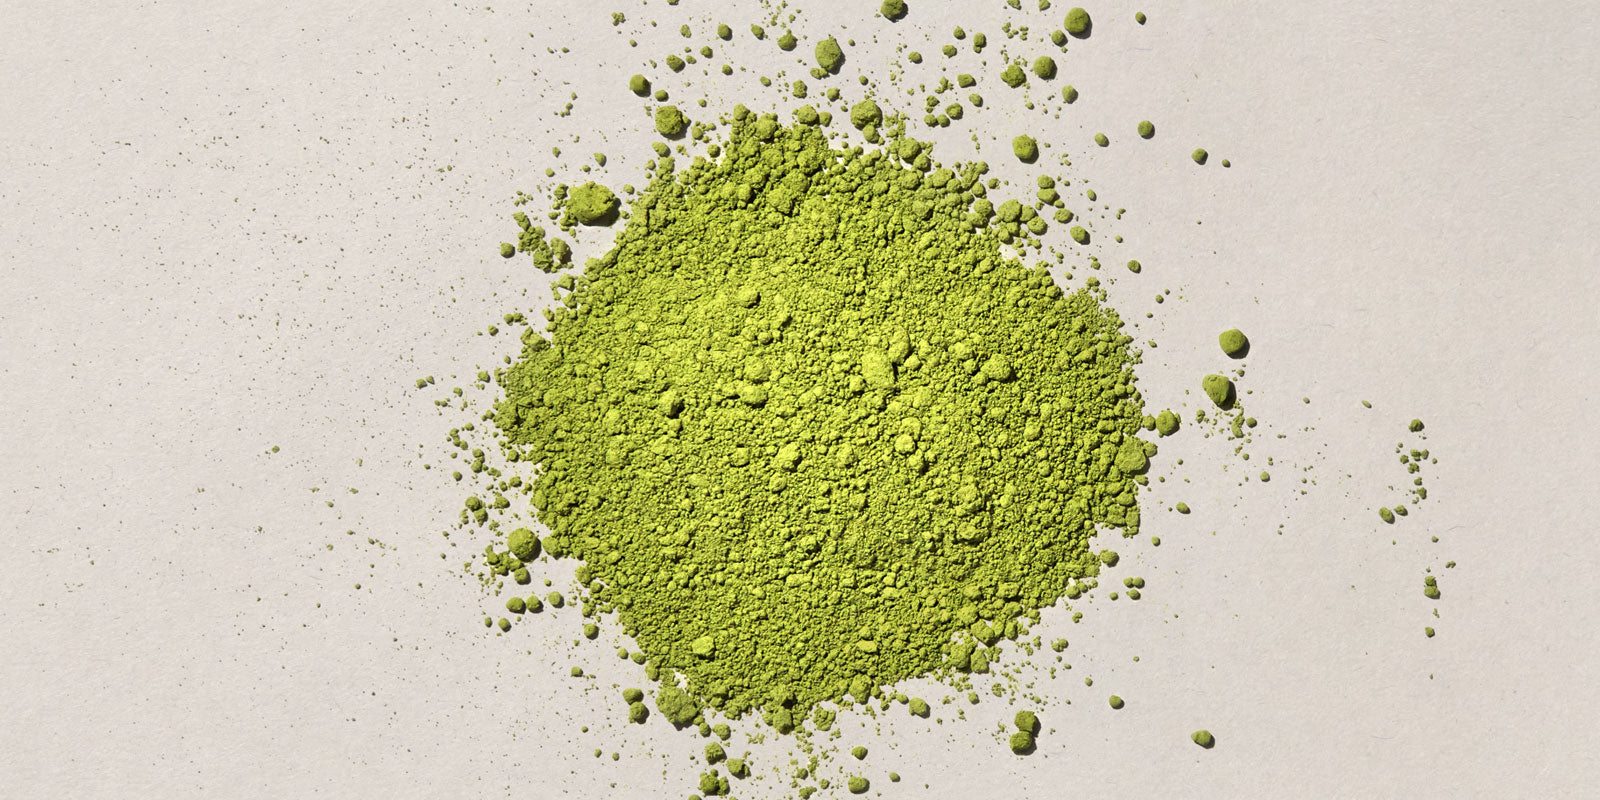 Green Tea Extract for Skin